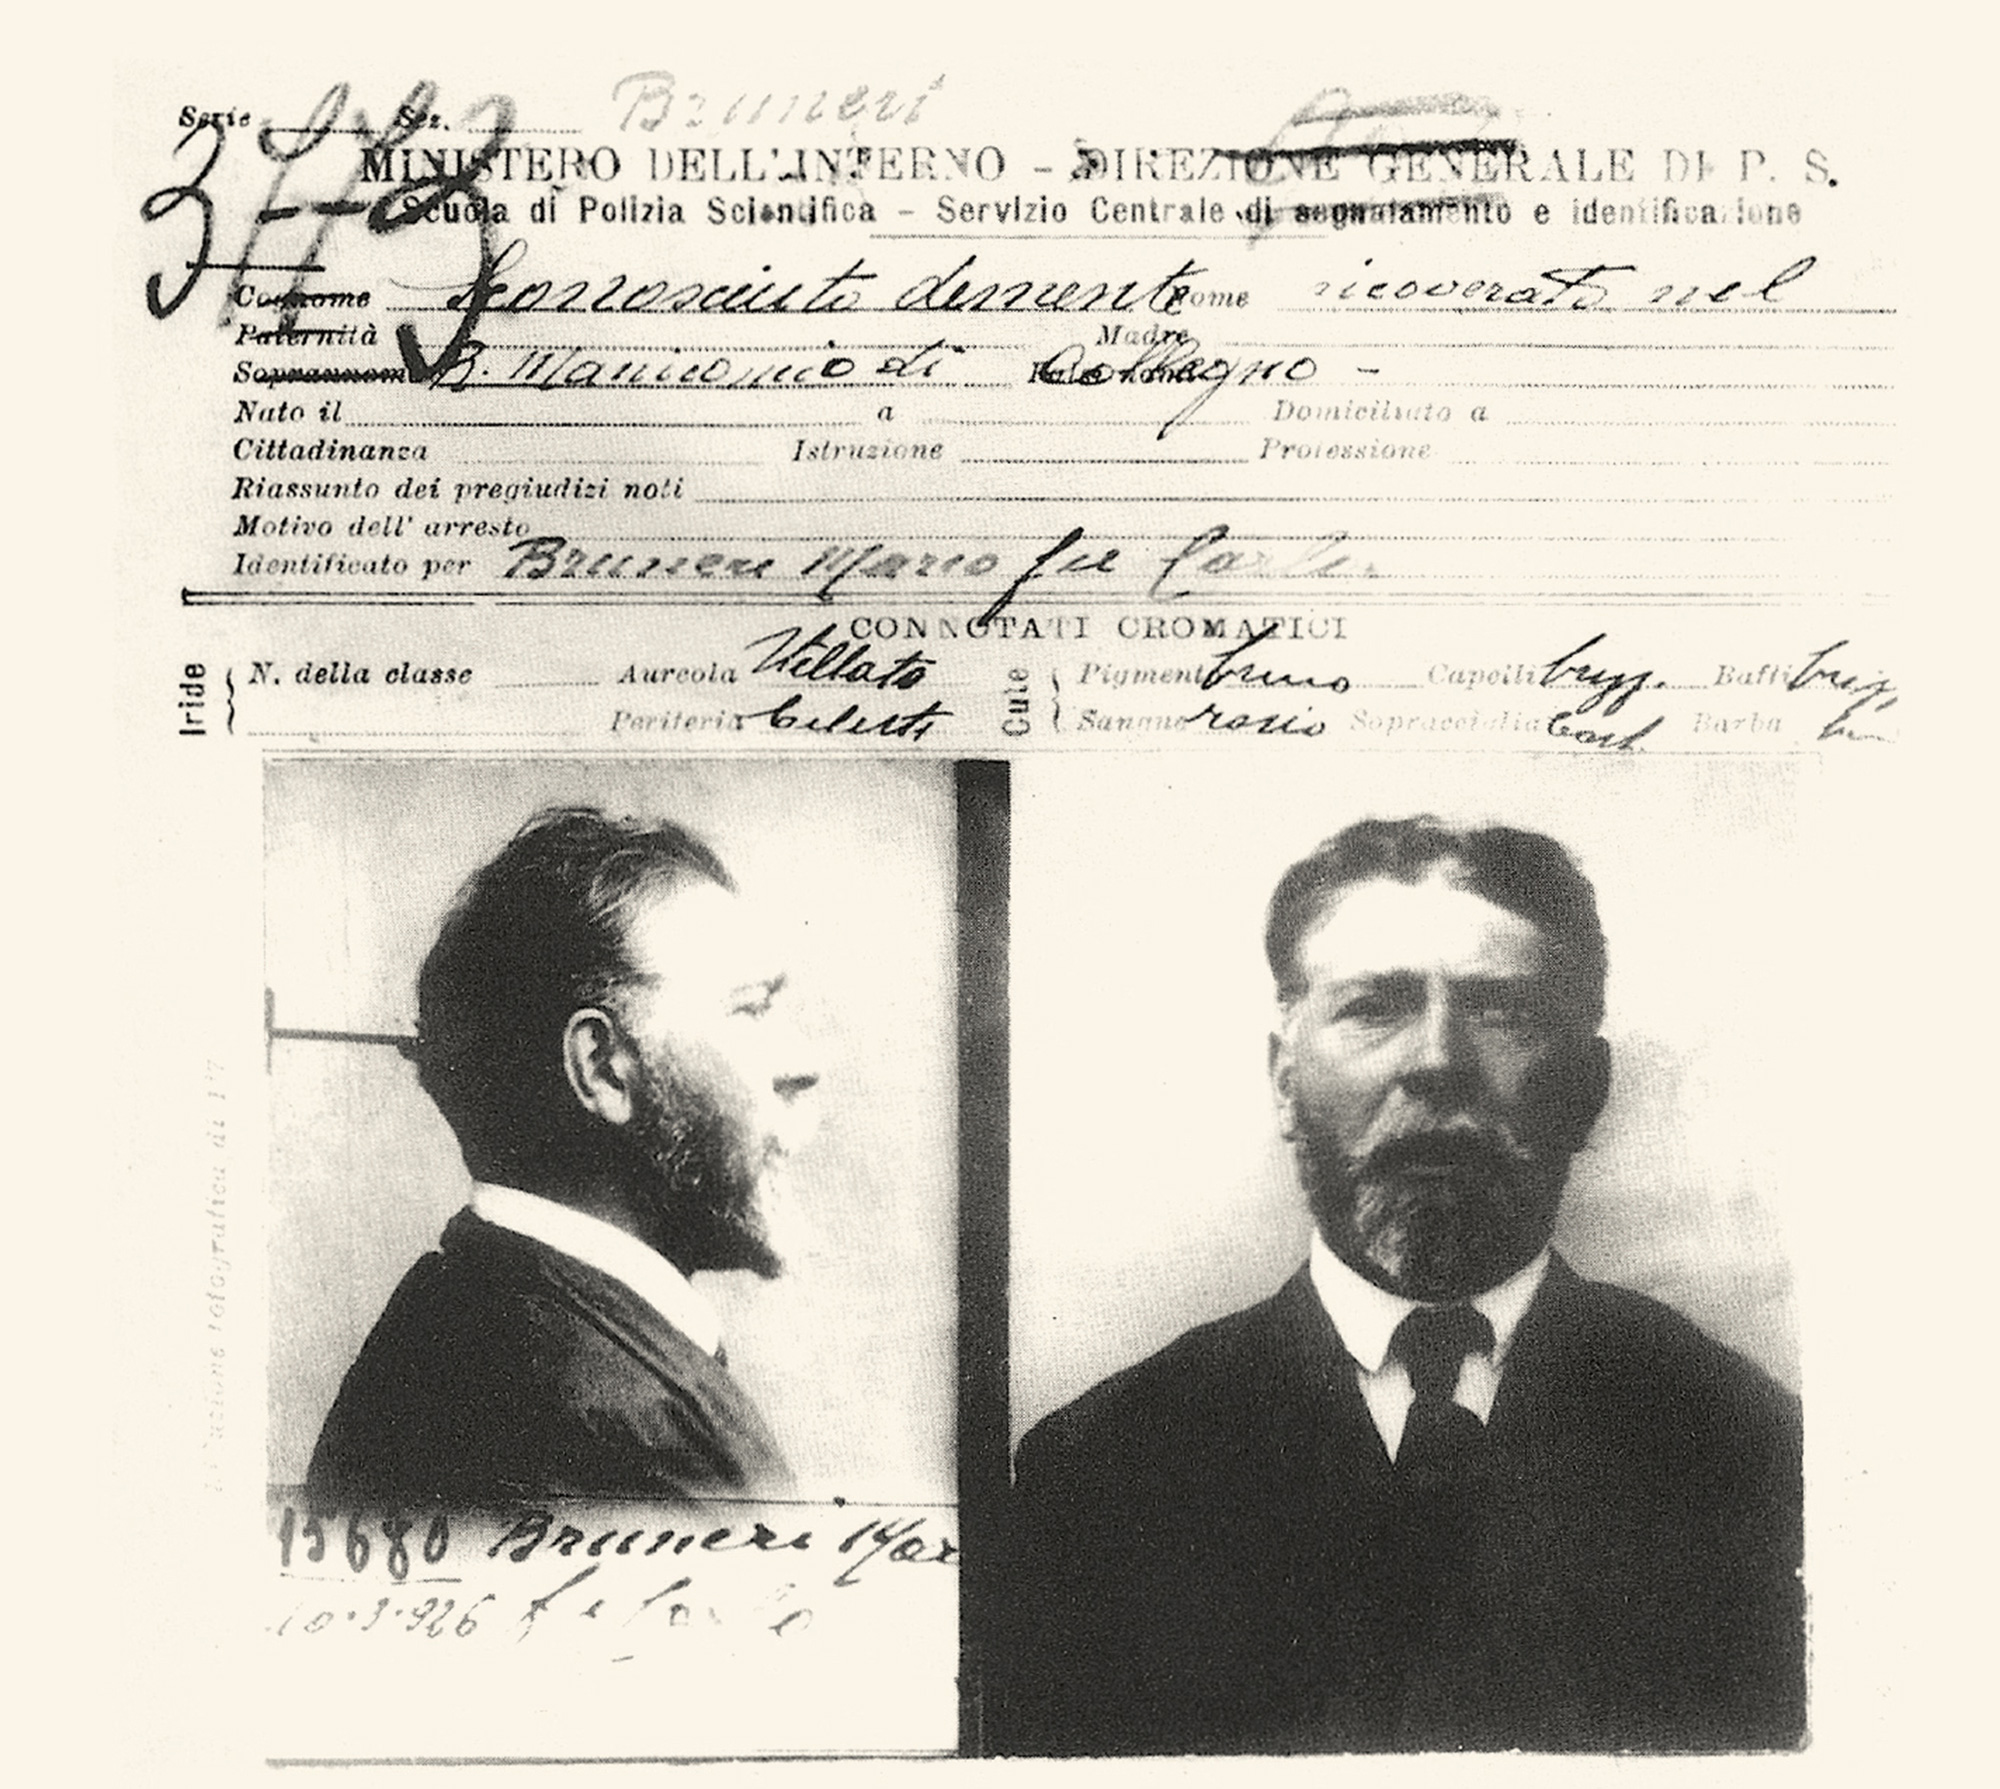 A page from a police file on the Collegno amnesiac, created on 10 March nineteen twenty-six. The name Mario Bruneri seems to have been added later, presumably after his official identification.